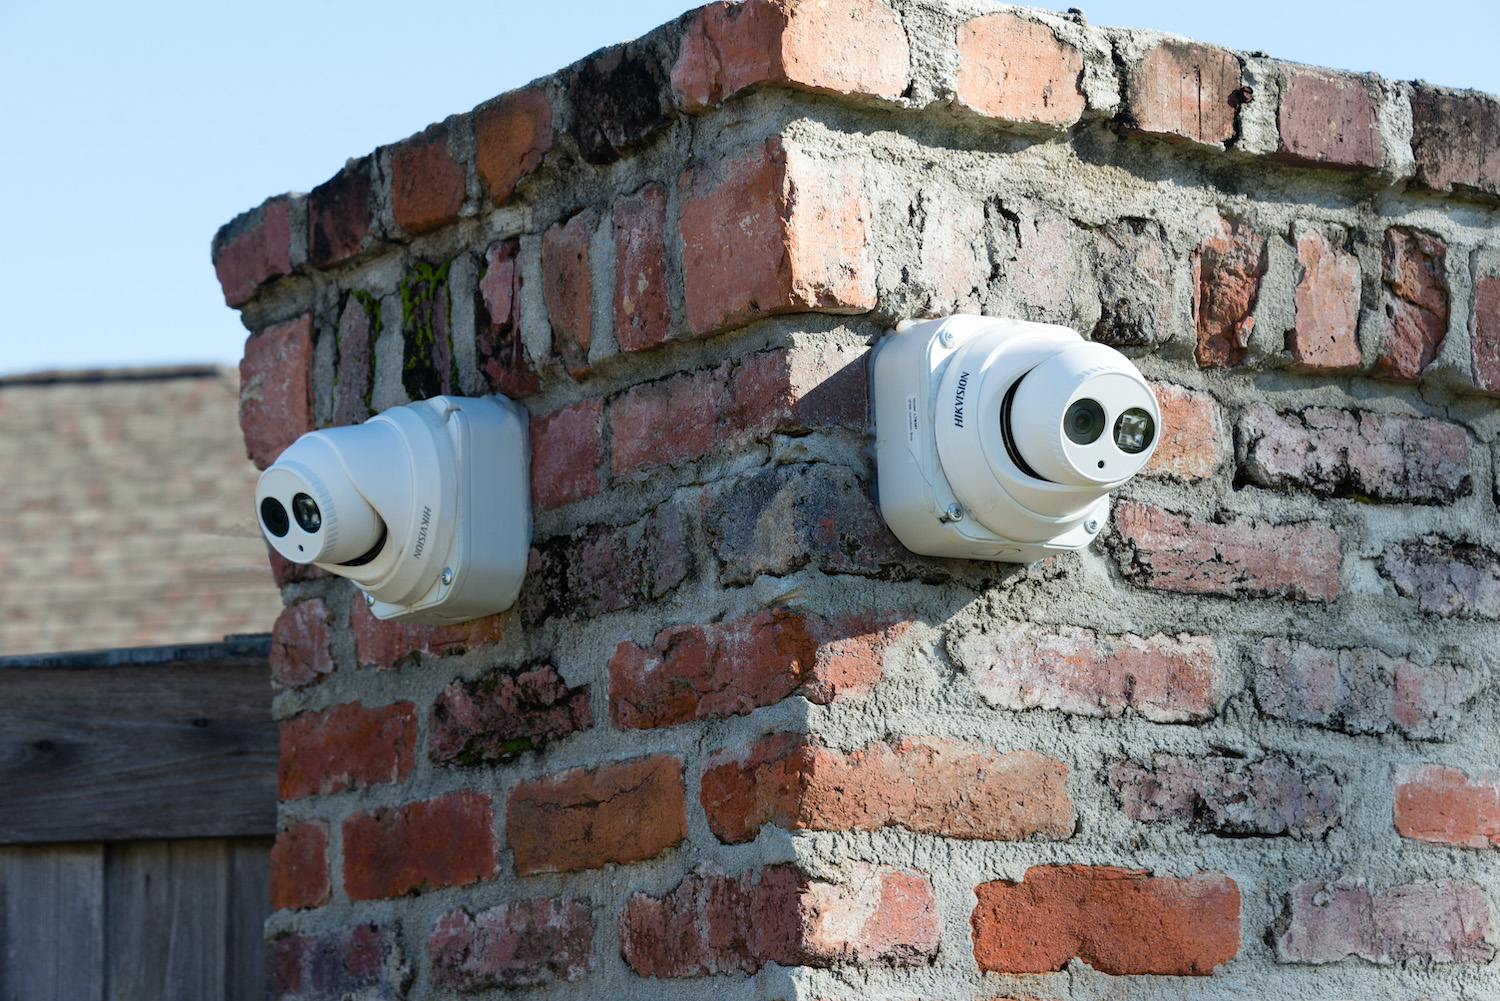 Security Camera mounted on wall